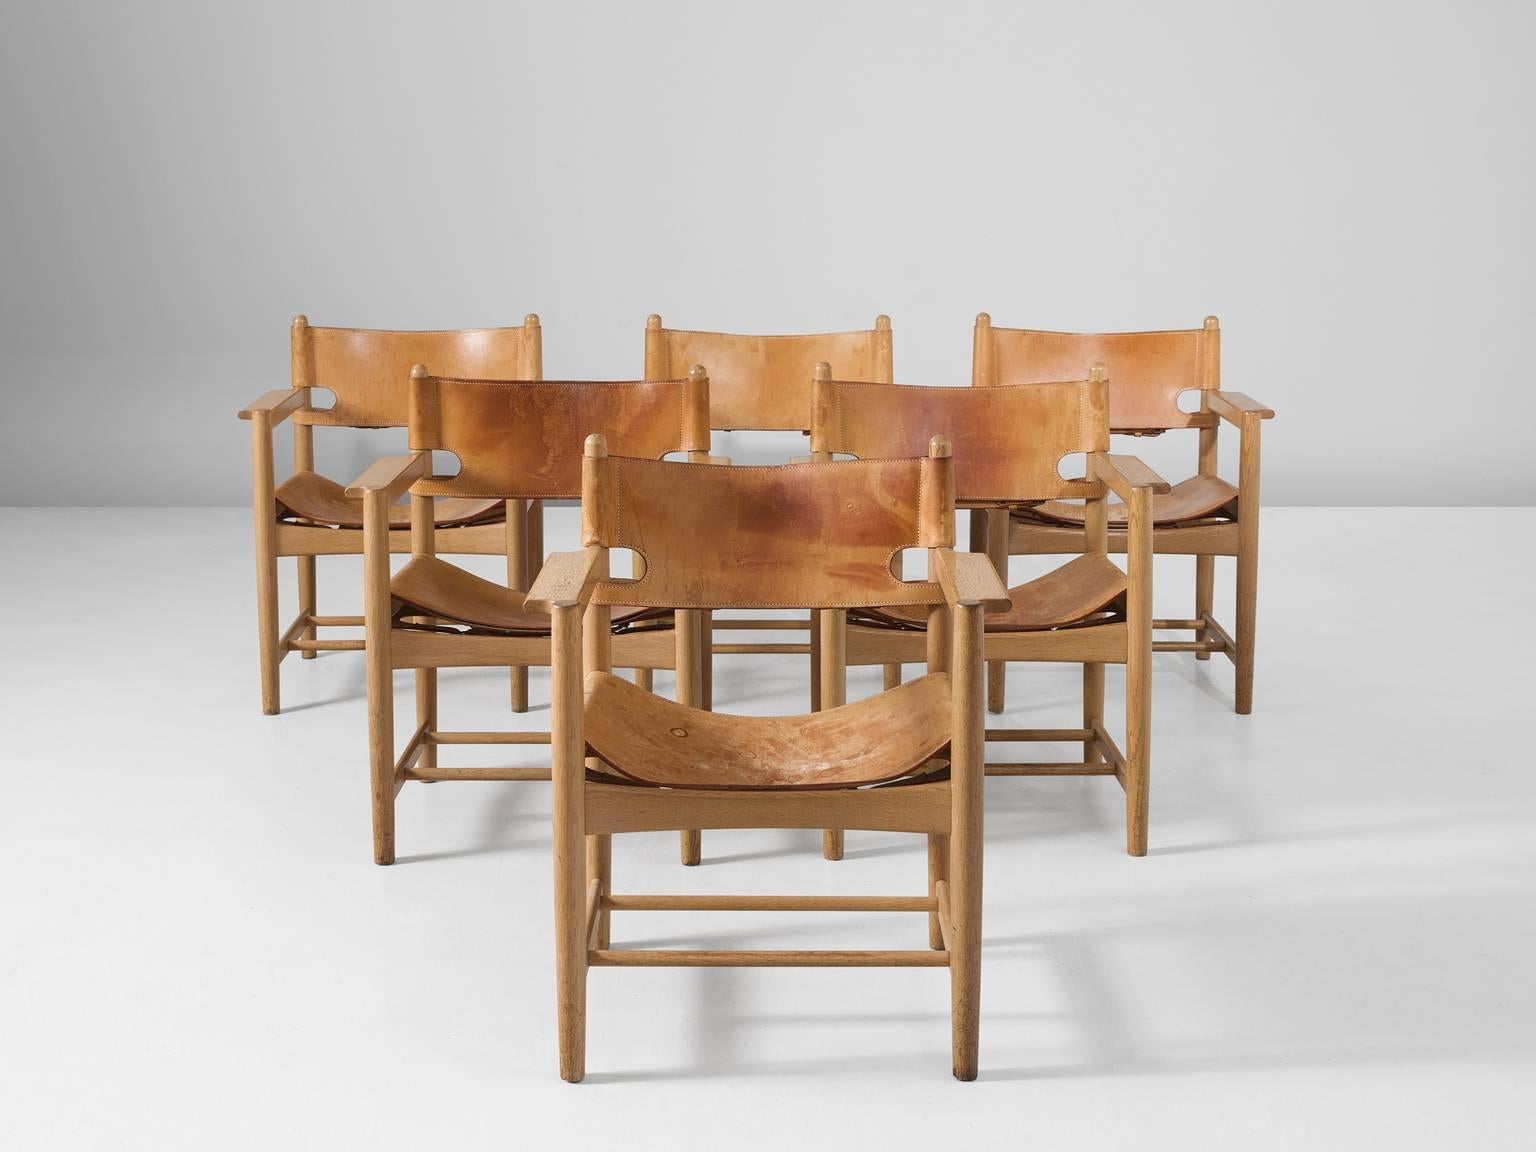 Set of six armchairs model 238, in oak and leather by Børge Mogensen for Fredericia Stolefabrik, Denmark, 1964. 

Set of six armchairs in solid oak. These chairs remind of the classical foldable 'director-chairs', yet this design by Danish designer